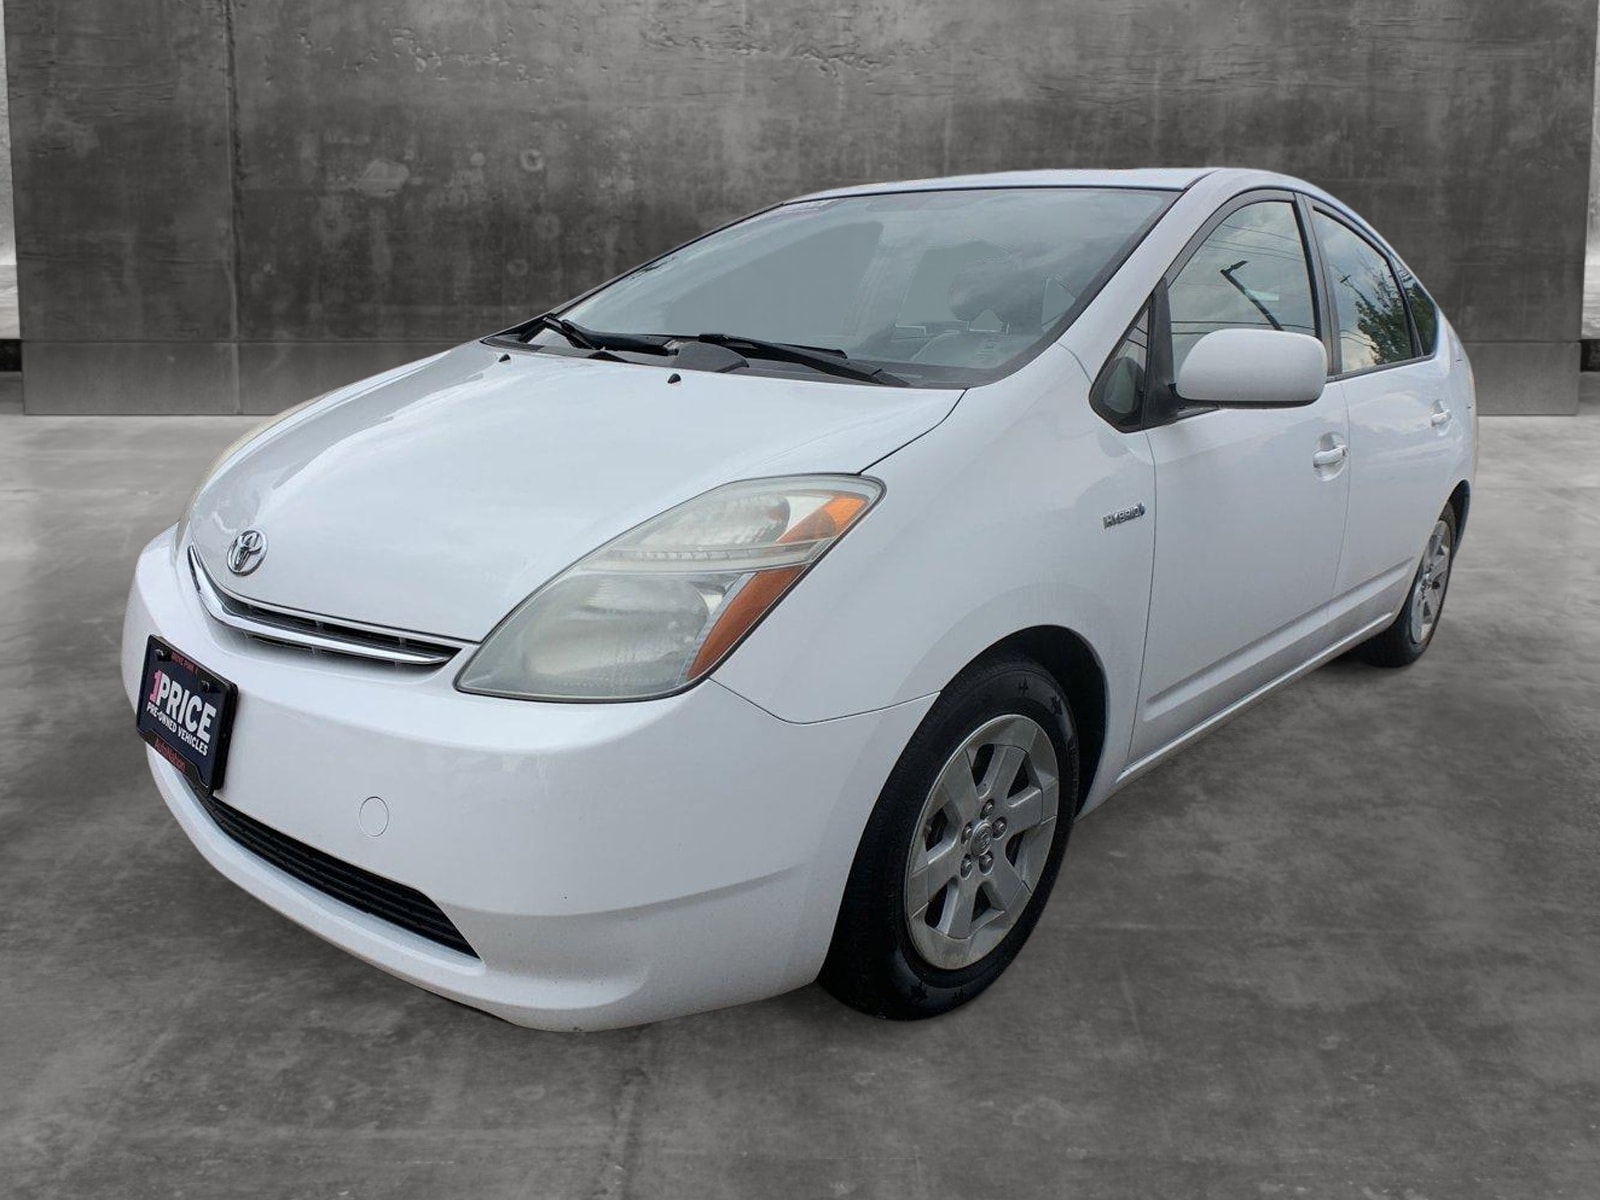 Used 2007 Toyota Prius Touring with VIN JTDKB20U873248698 for sale in Littleton, CO